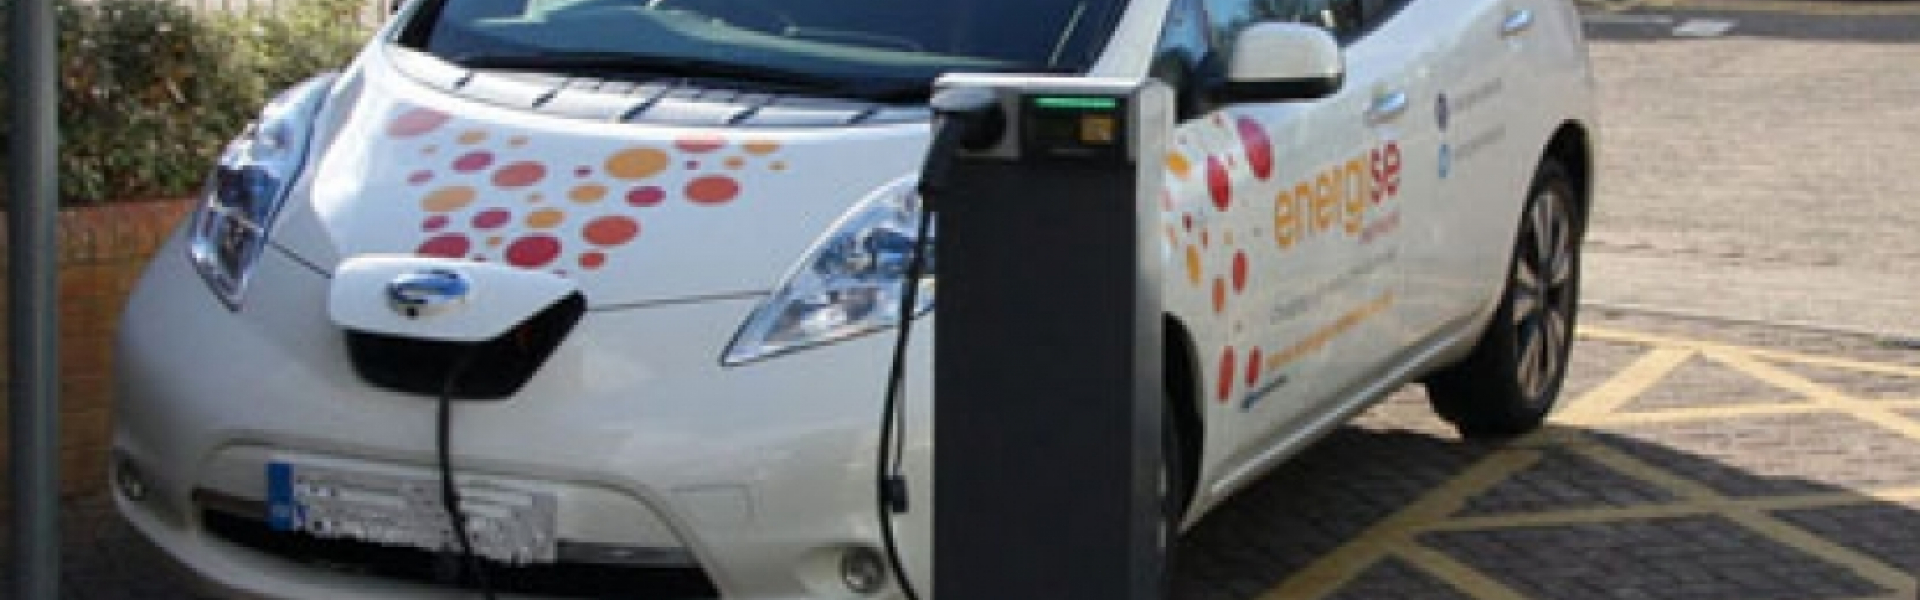 delighted to work with the company and share a parallel ambition to boost public charging throughout Wealden.